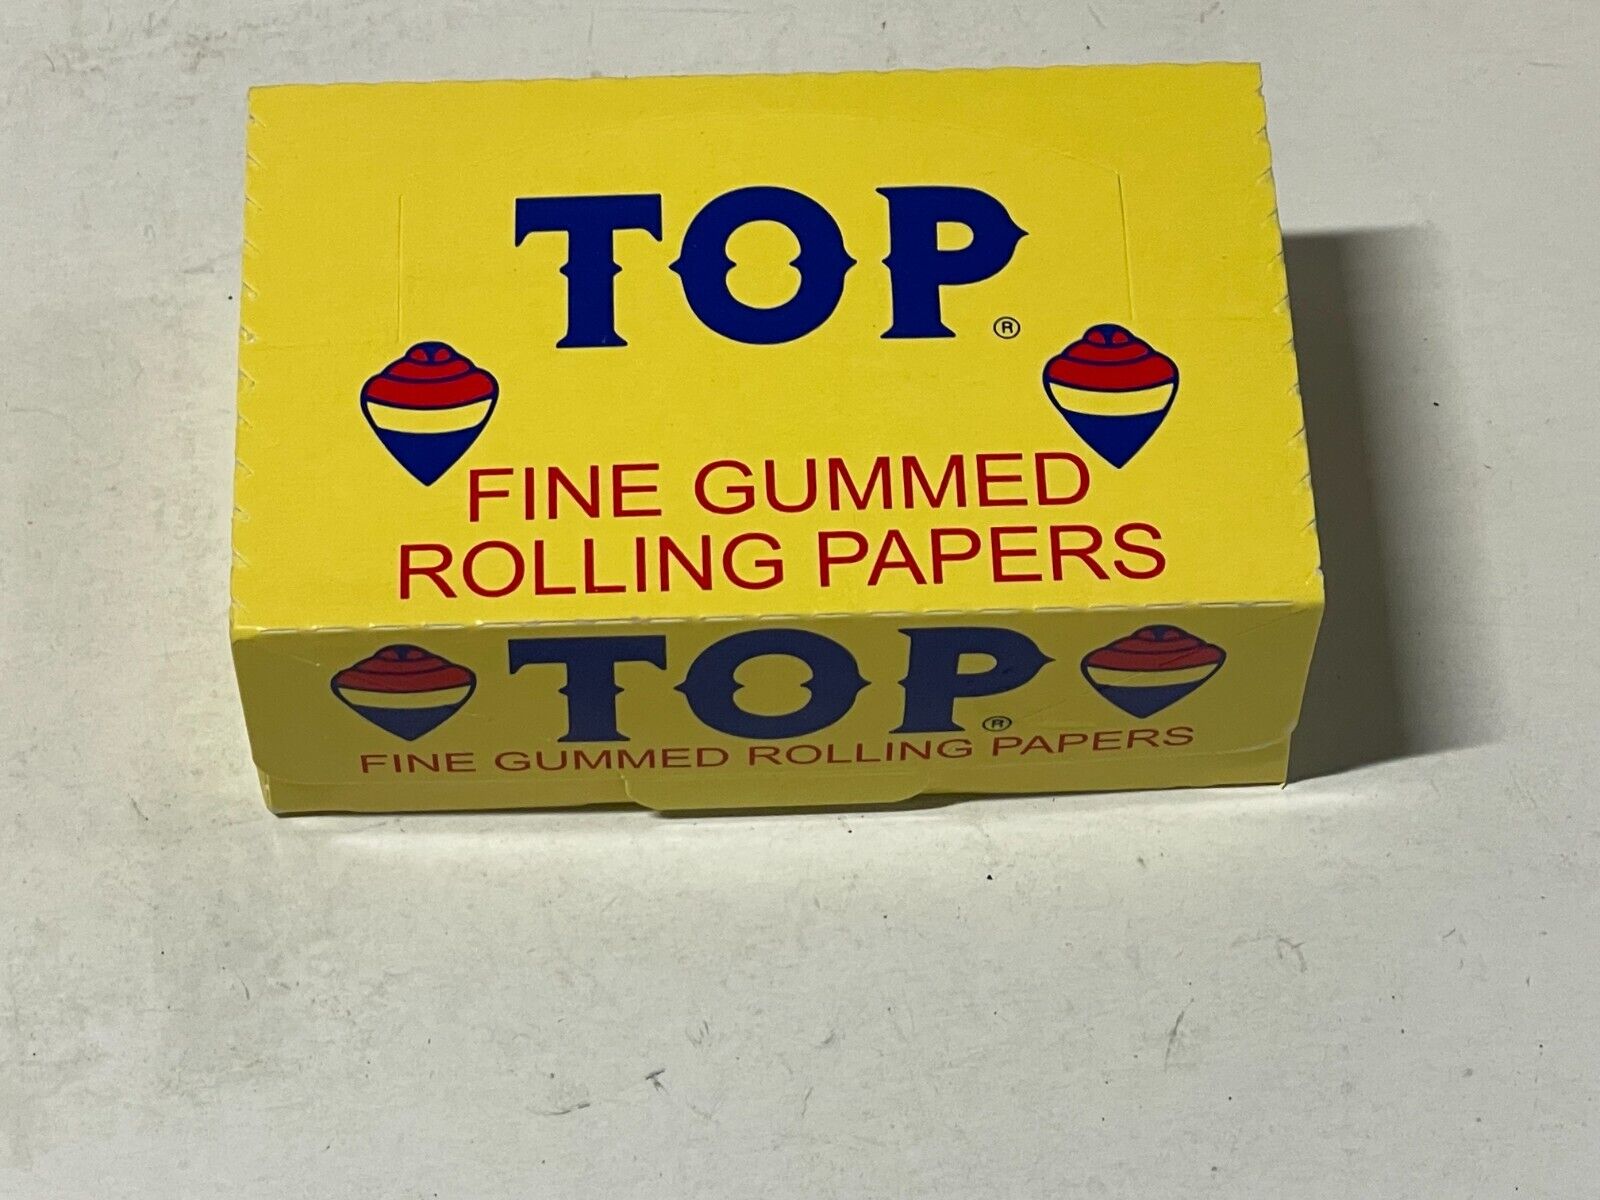 Top Rolling Papers Fine Gummed Cigarette Papers (Full Display Box - 24 Booklets)